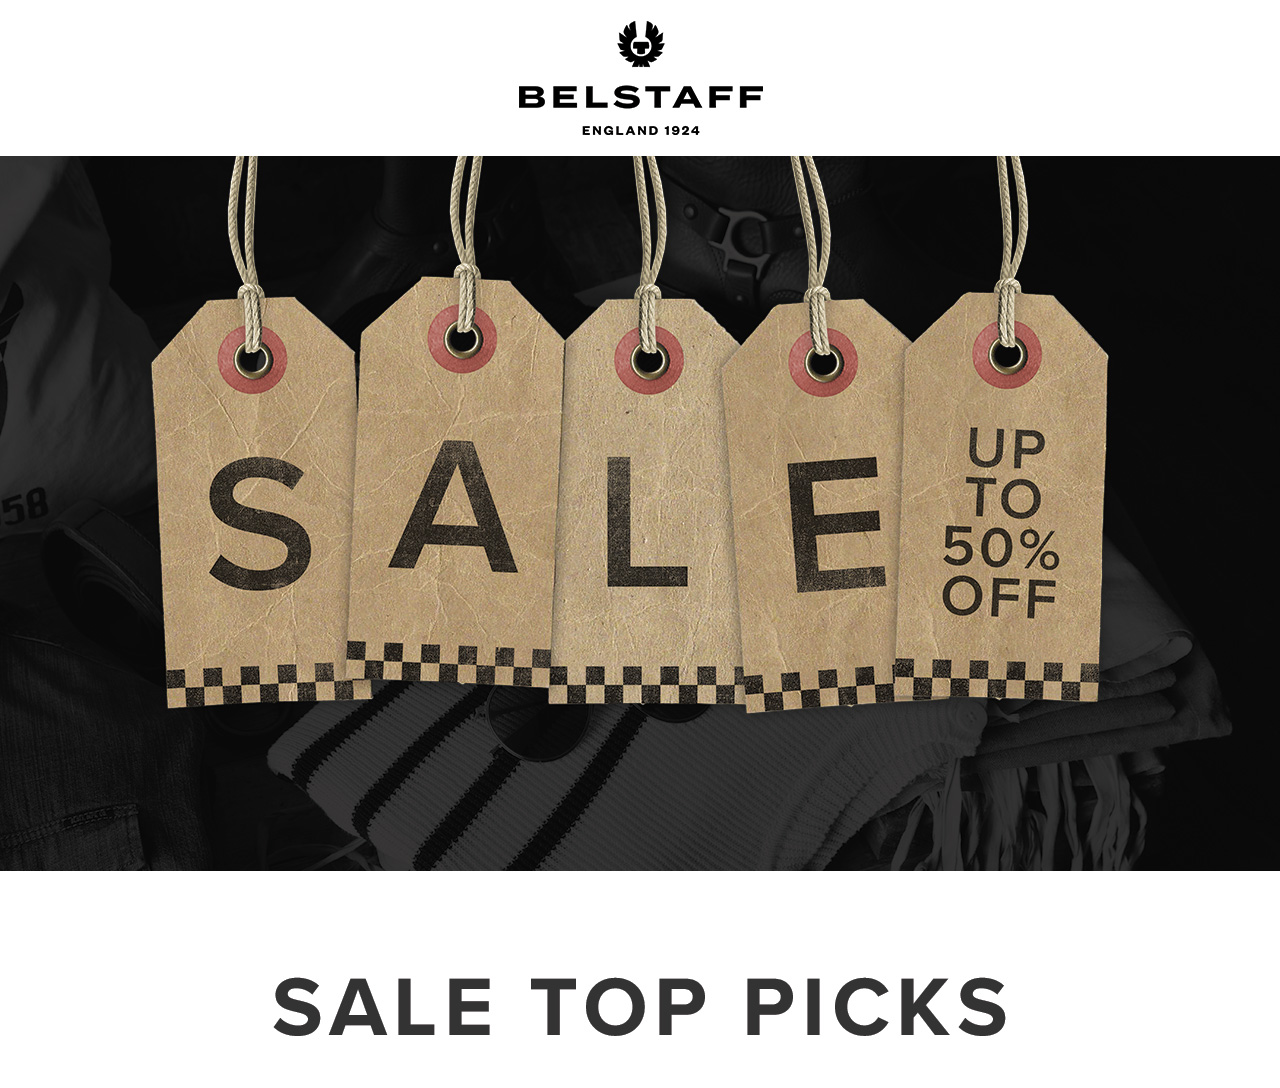 Our selection of the best picks from Sale at up to 50% off.